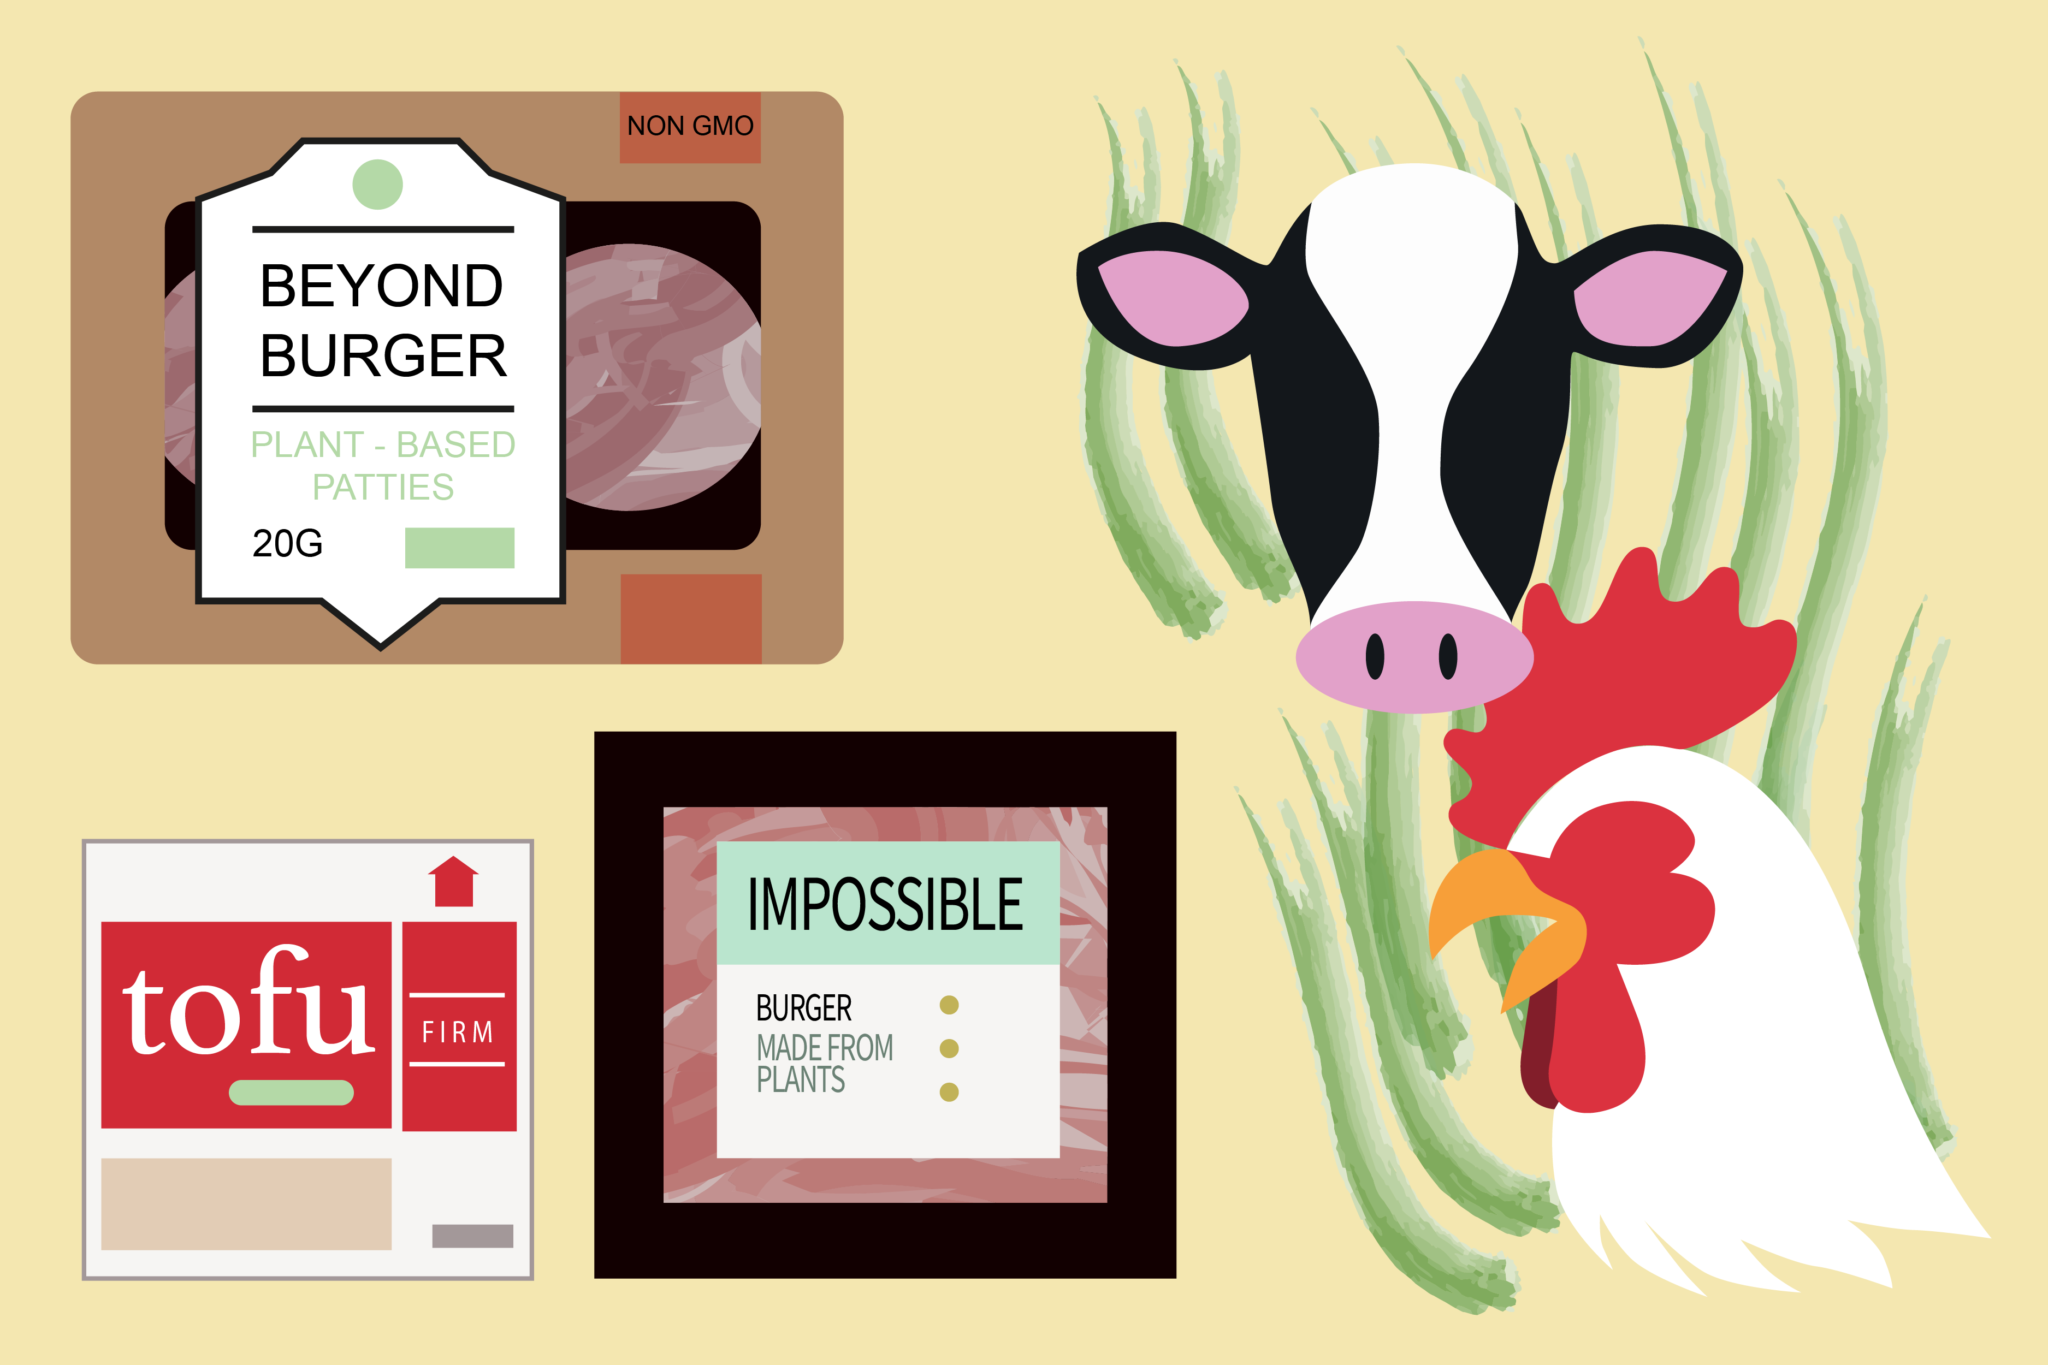 Animal agriculture and alternative meats: advancing sustainability efforts through communication and allied innovation